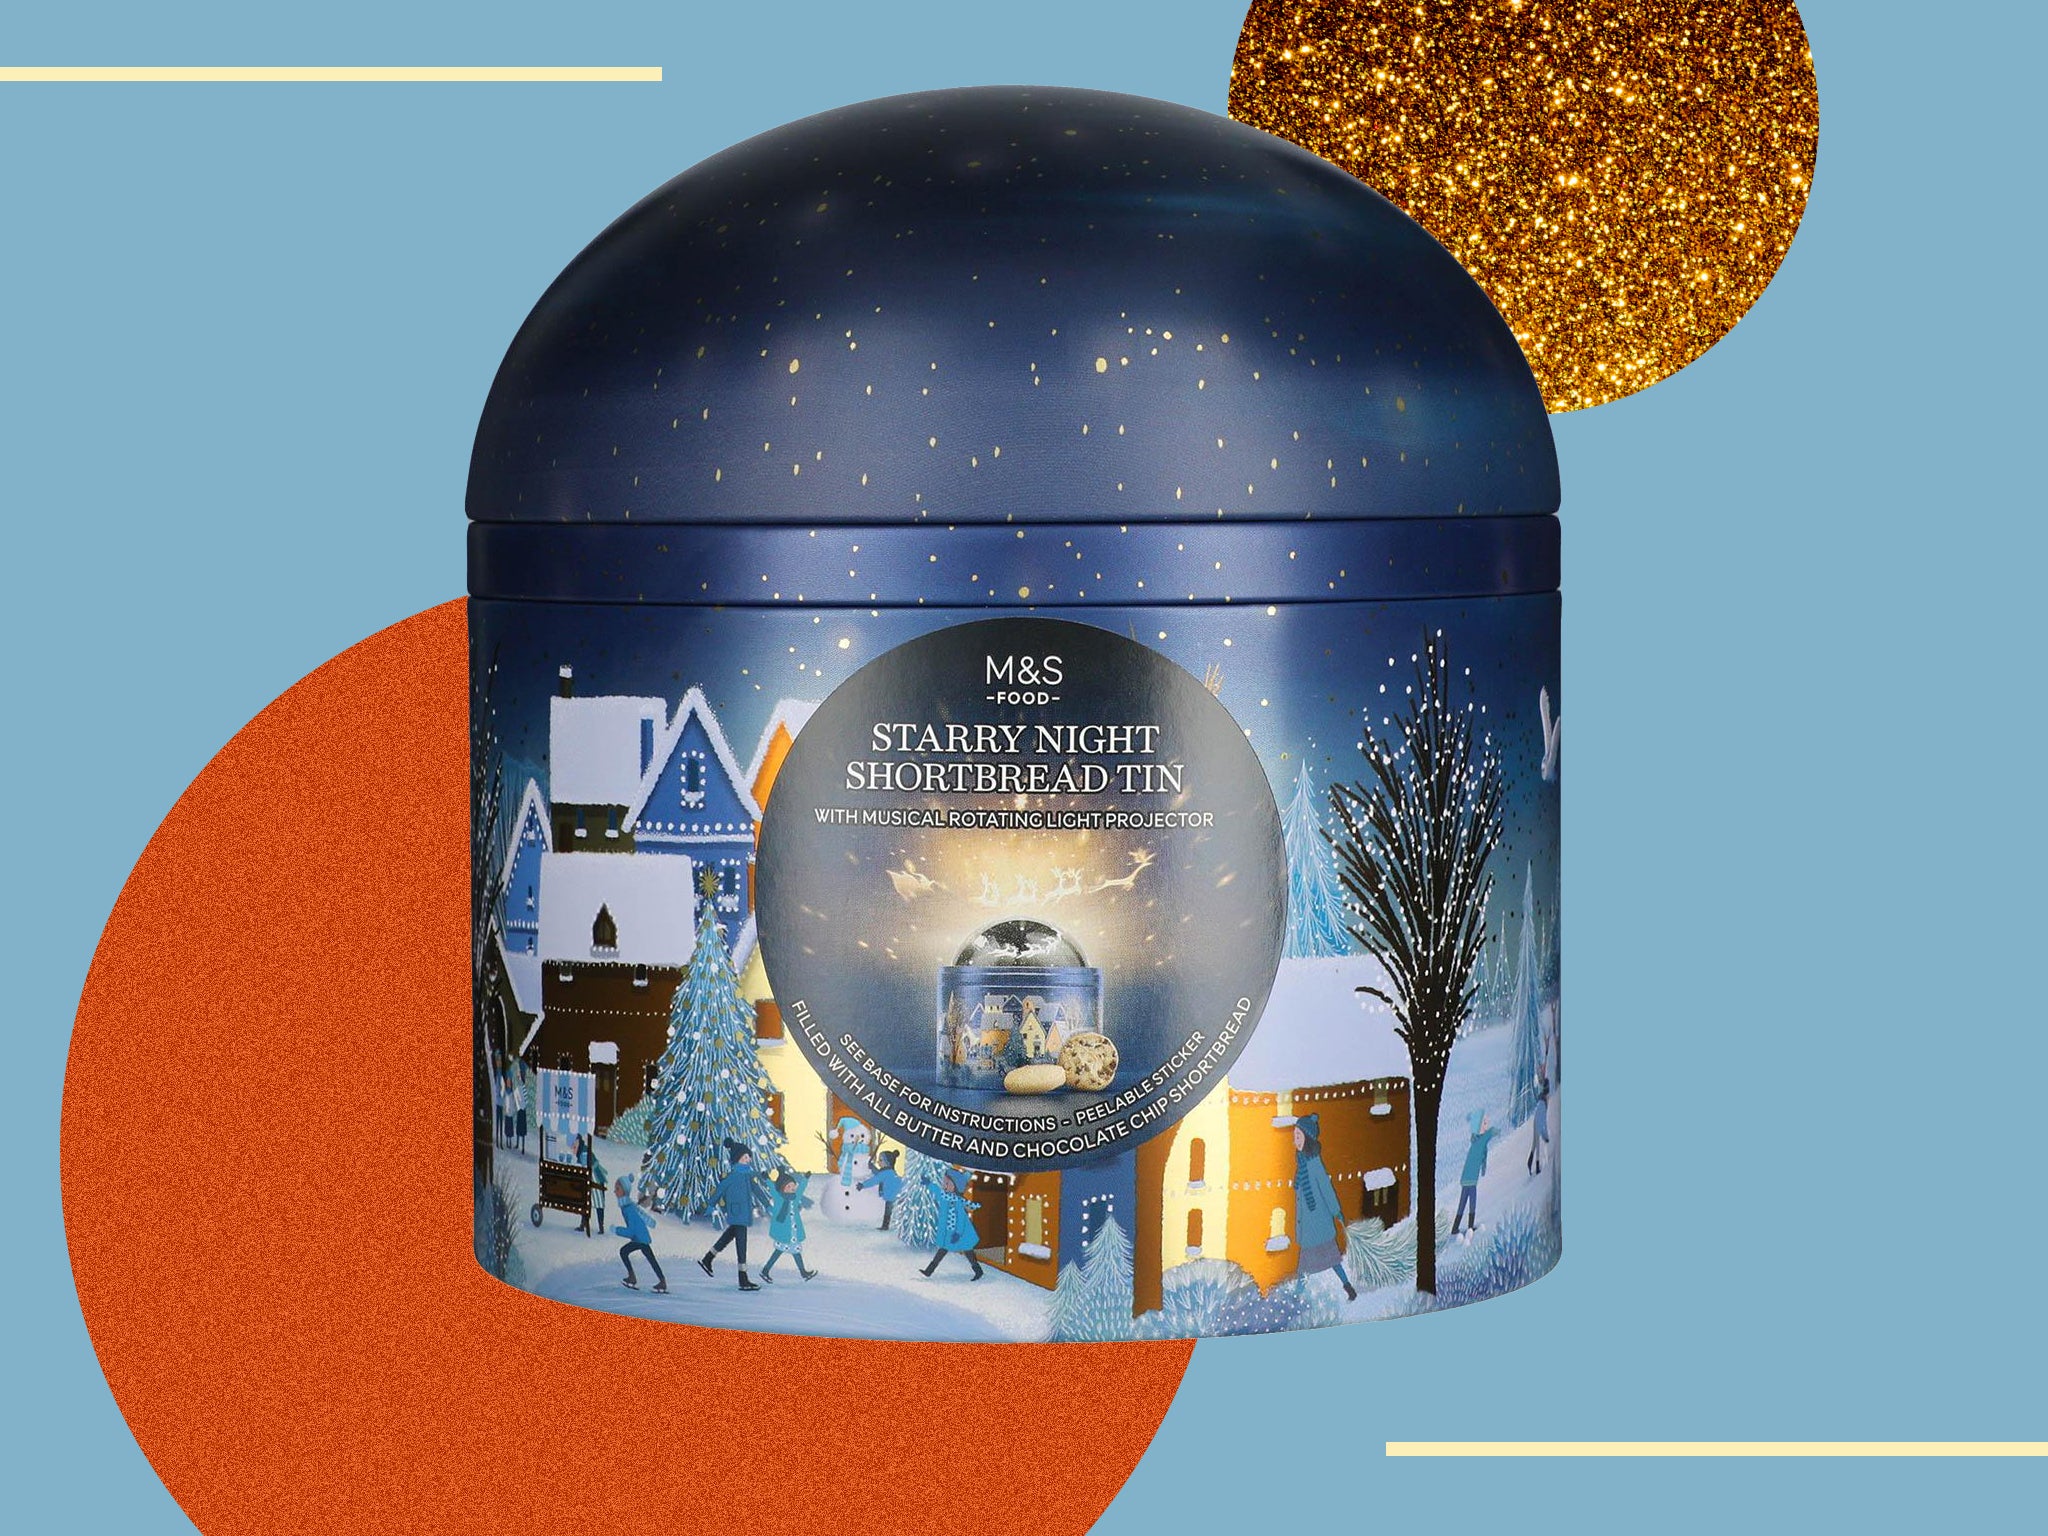 New M&S Christmas biscuit tin is also a musical light projector